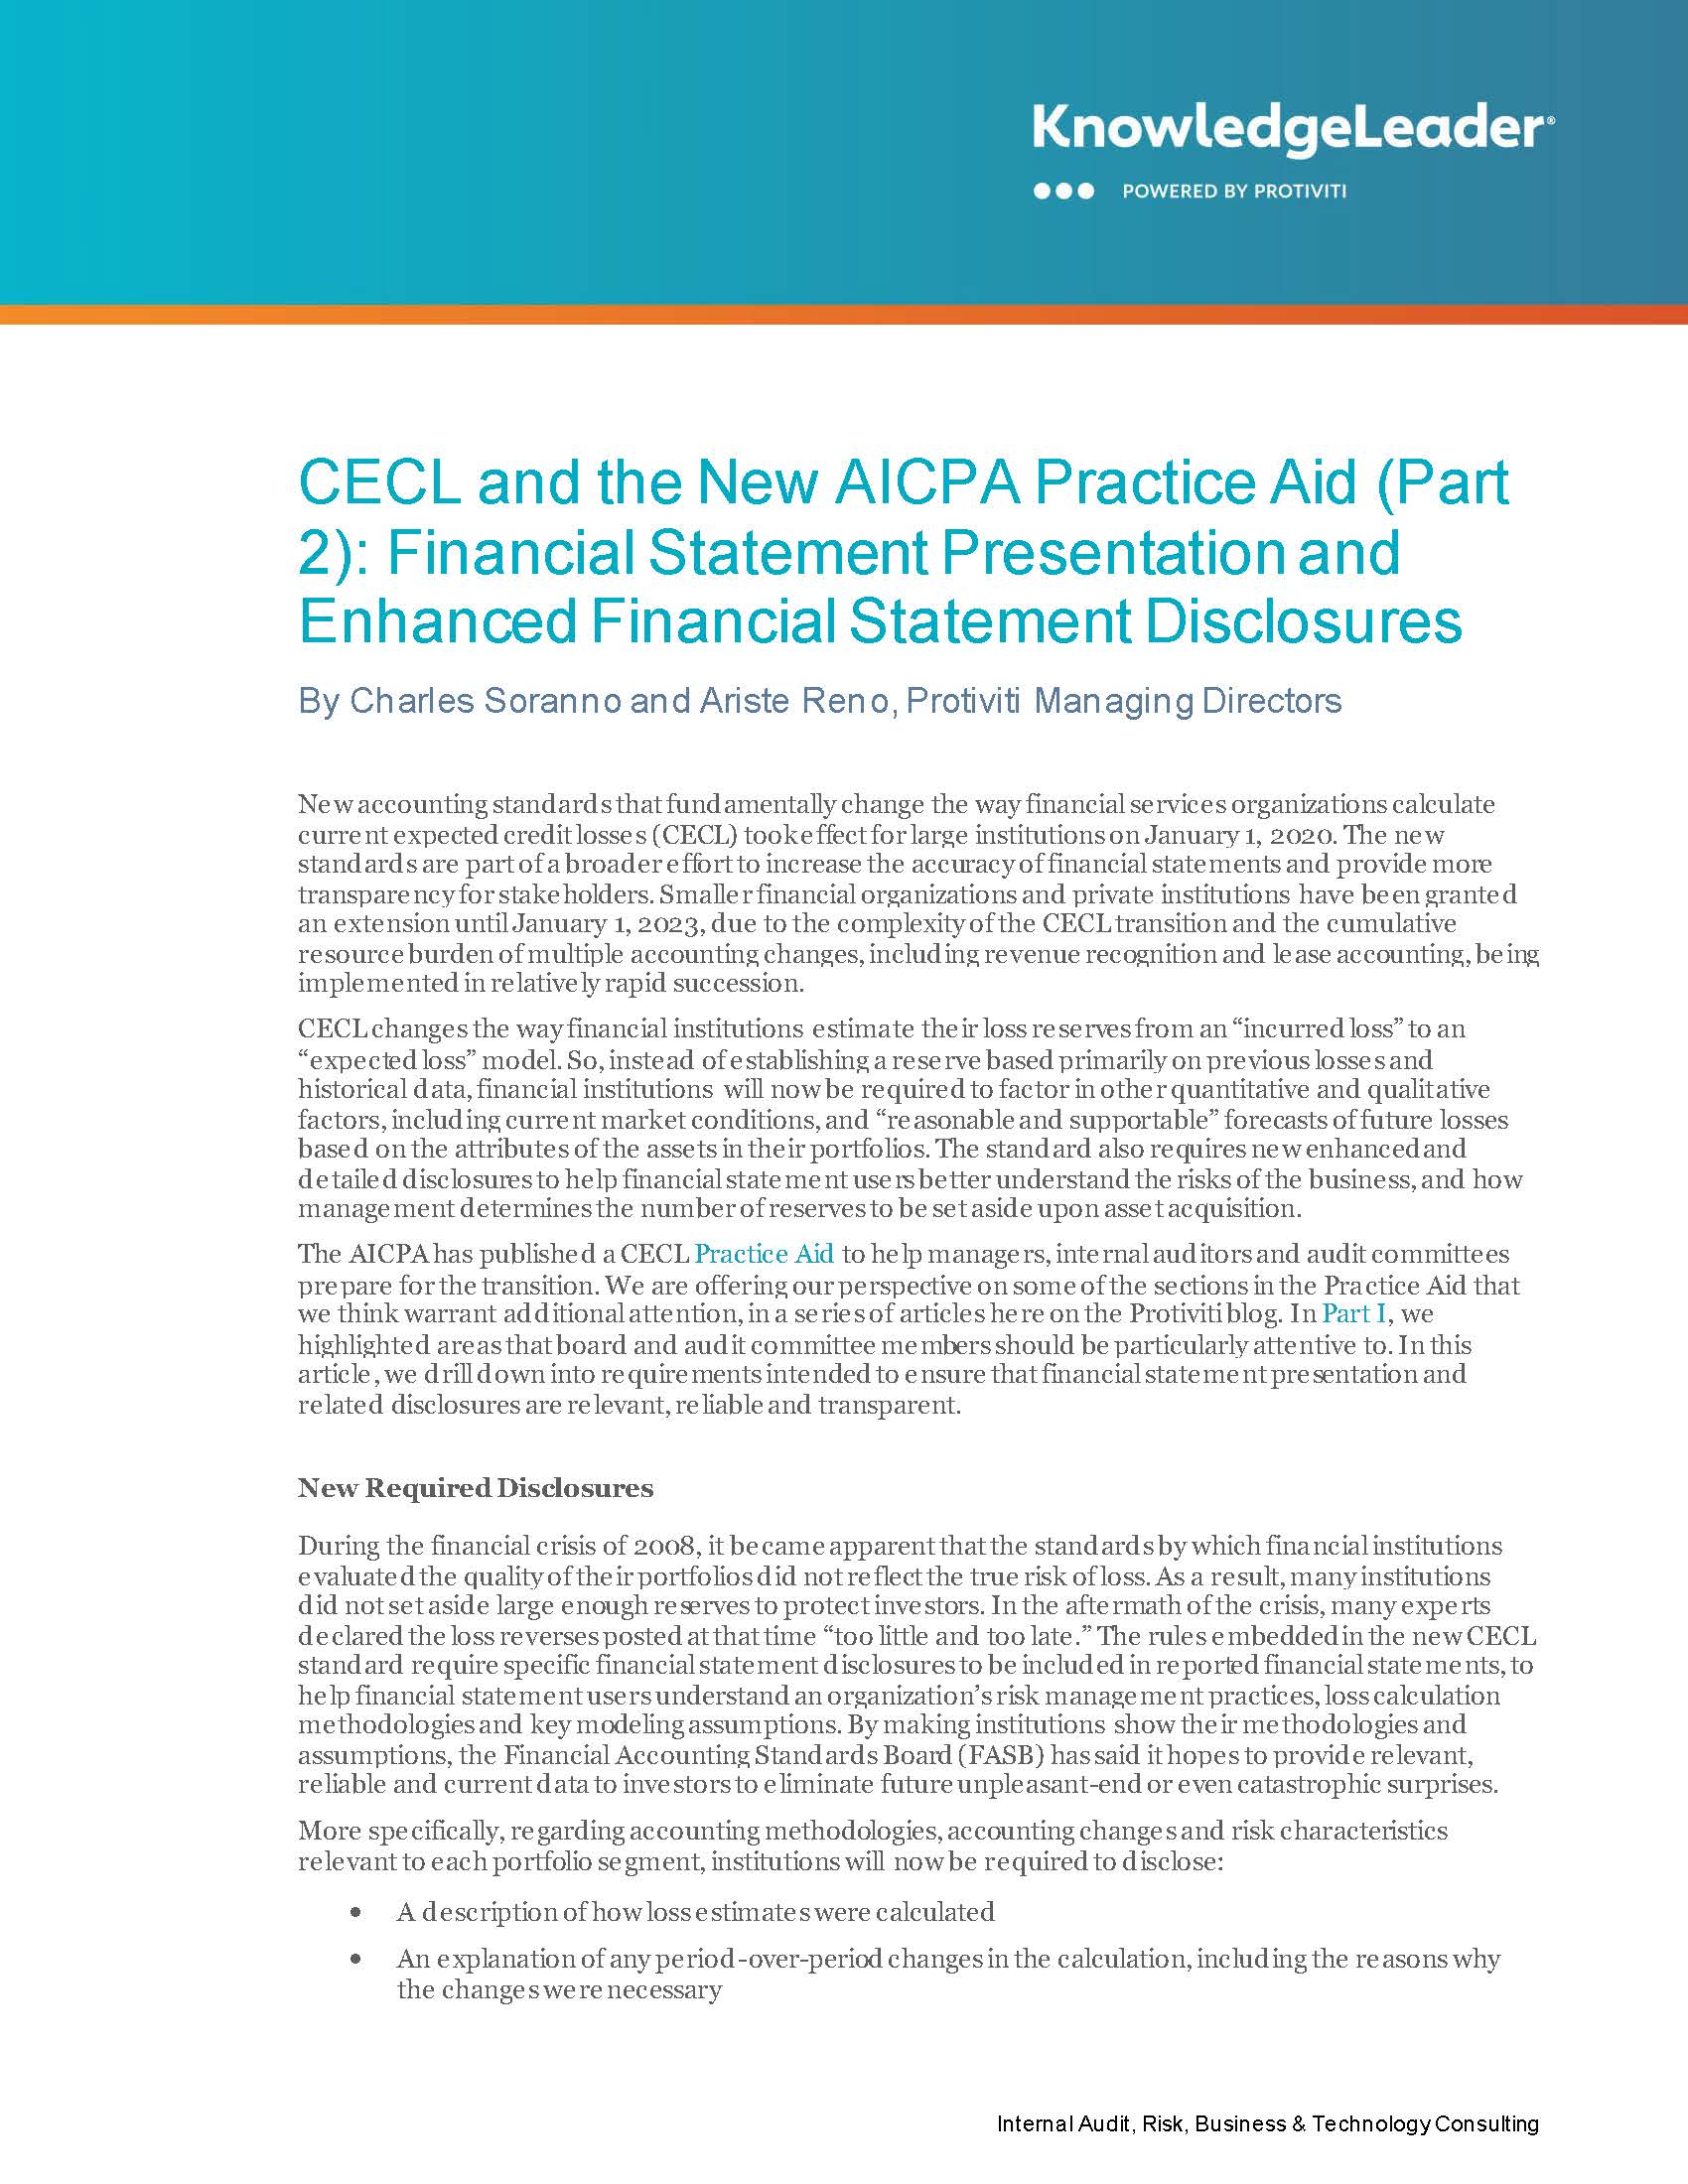 CECL and the New AICPA Practice Aid (Part 2): Financial Statement Presentation and Enhanced Financial Statement Disclosures